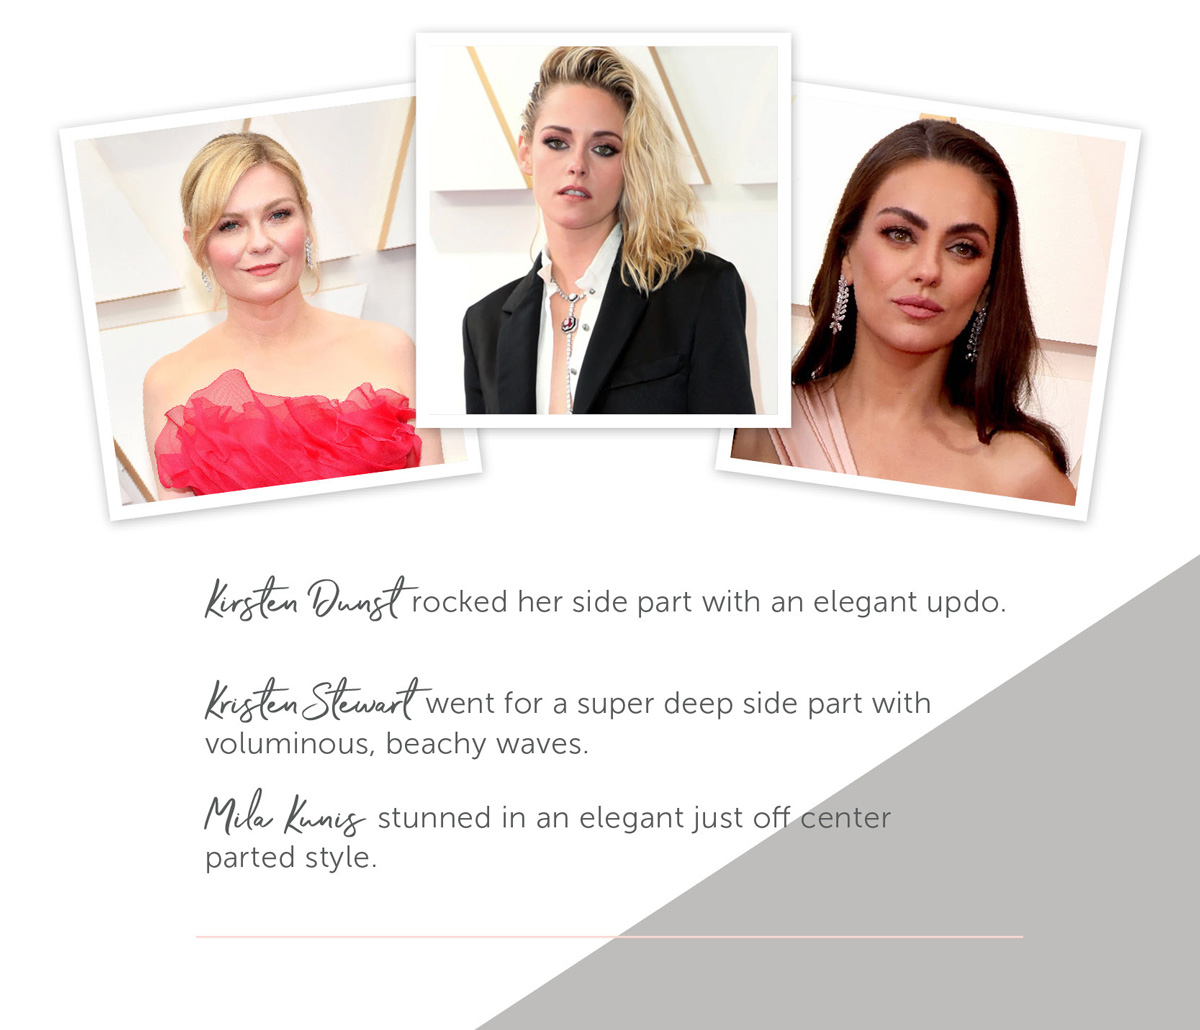 Kirsten Dunst rocked her side part with an elegant updo. Kristen Stewart went for a super deep side part with voluminous, beachy waves. Mila Kunis stunned in an elegant just off center parted style.